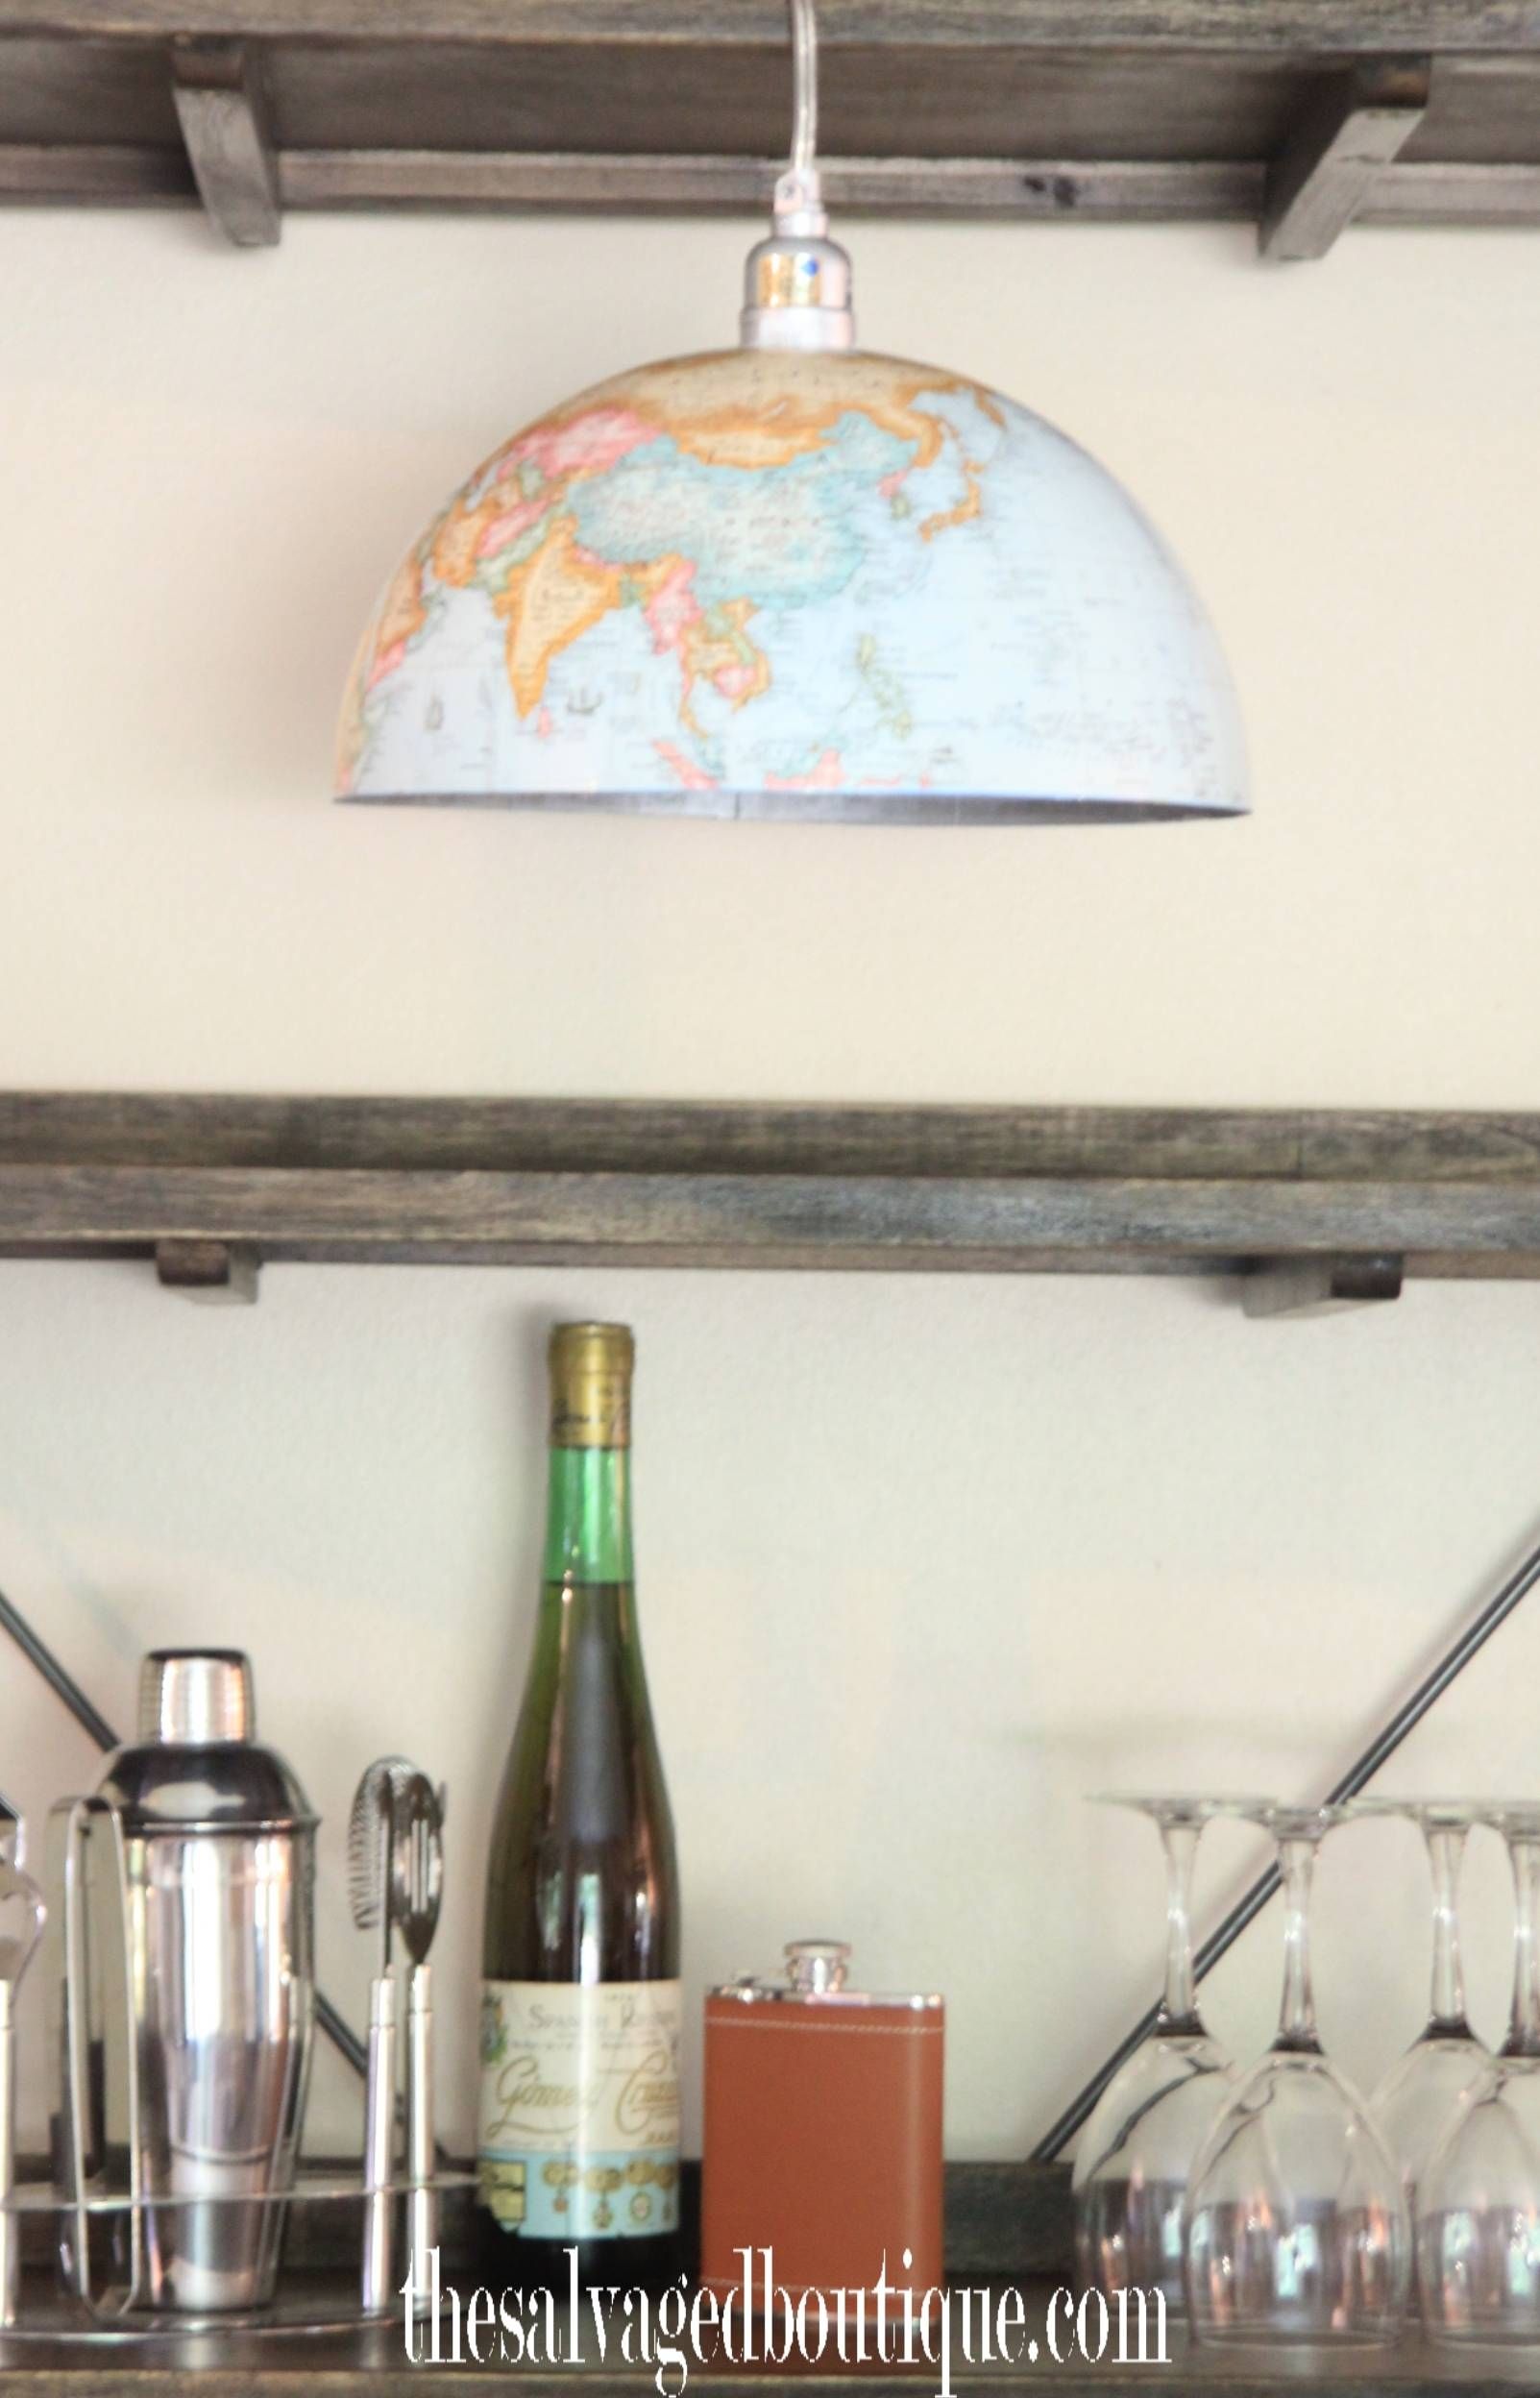 New Etsy Listing & Diy Project: Upcycled World Globe Pendant Light Intended For World Globe Pendant Lights (View 15 of 15)